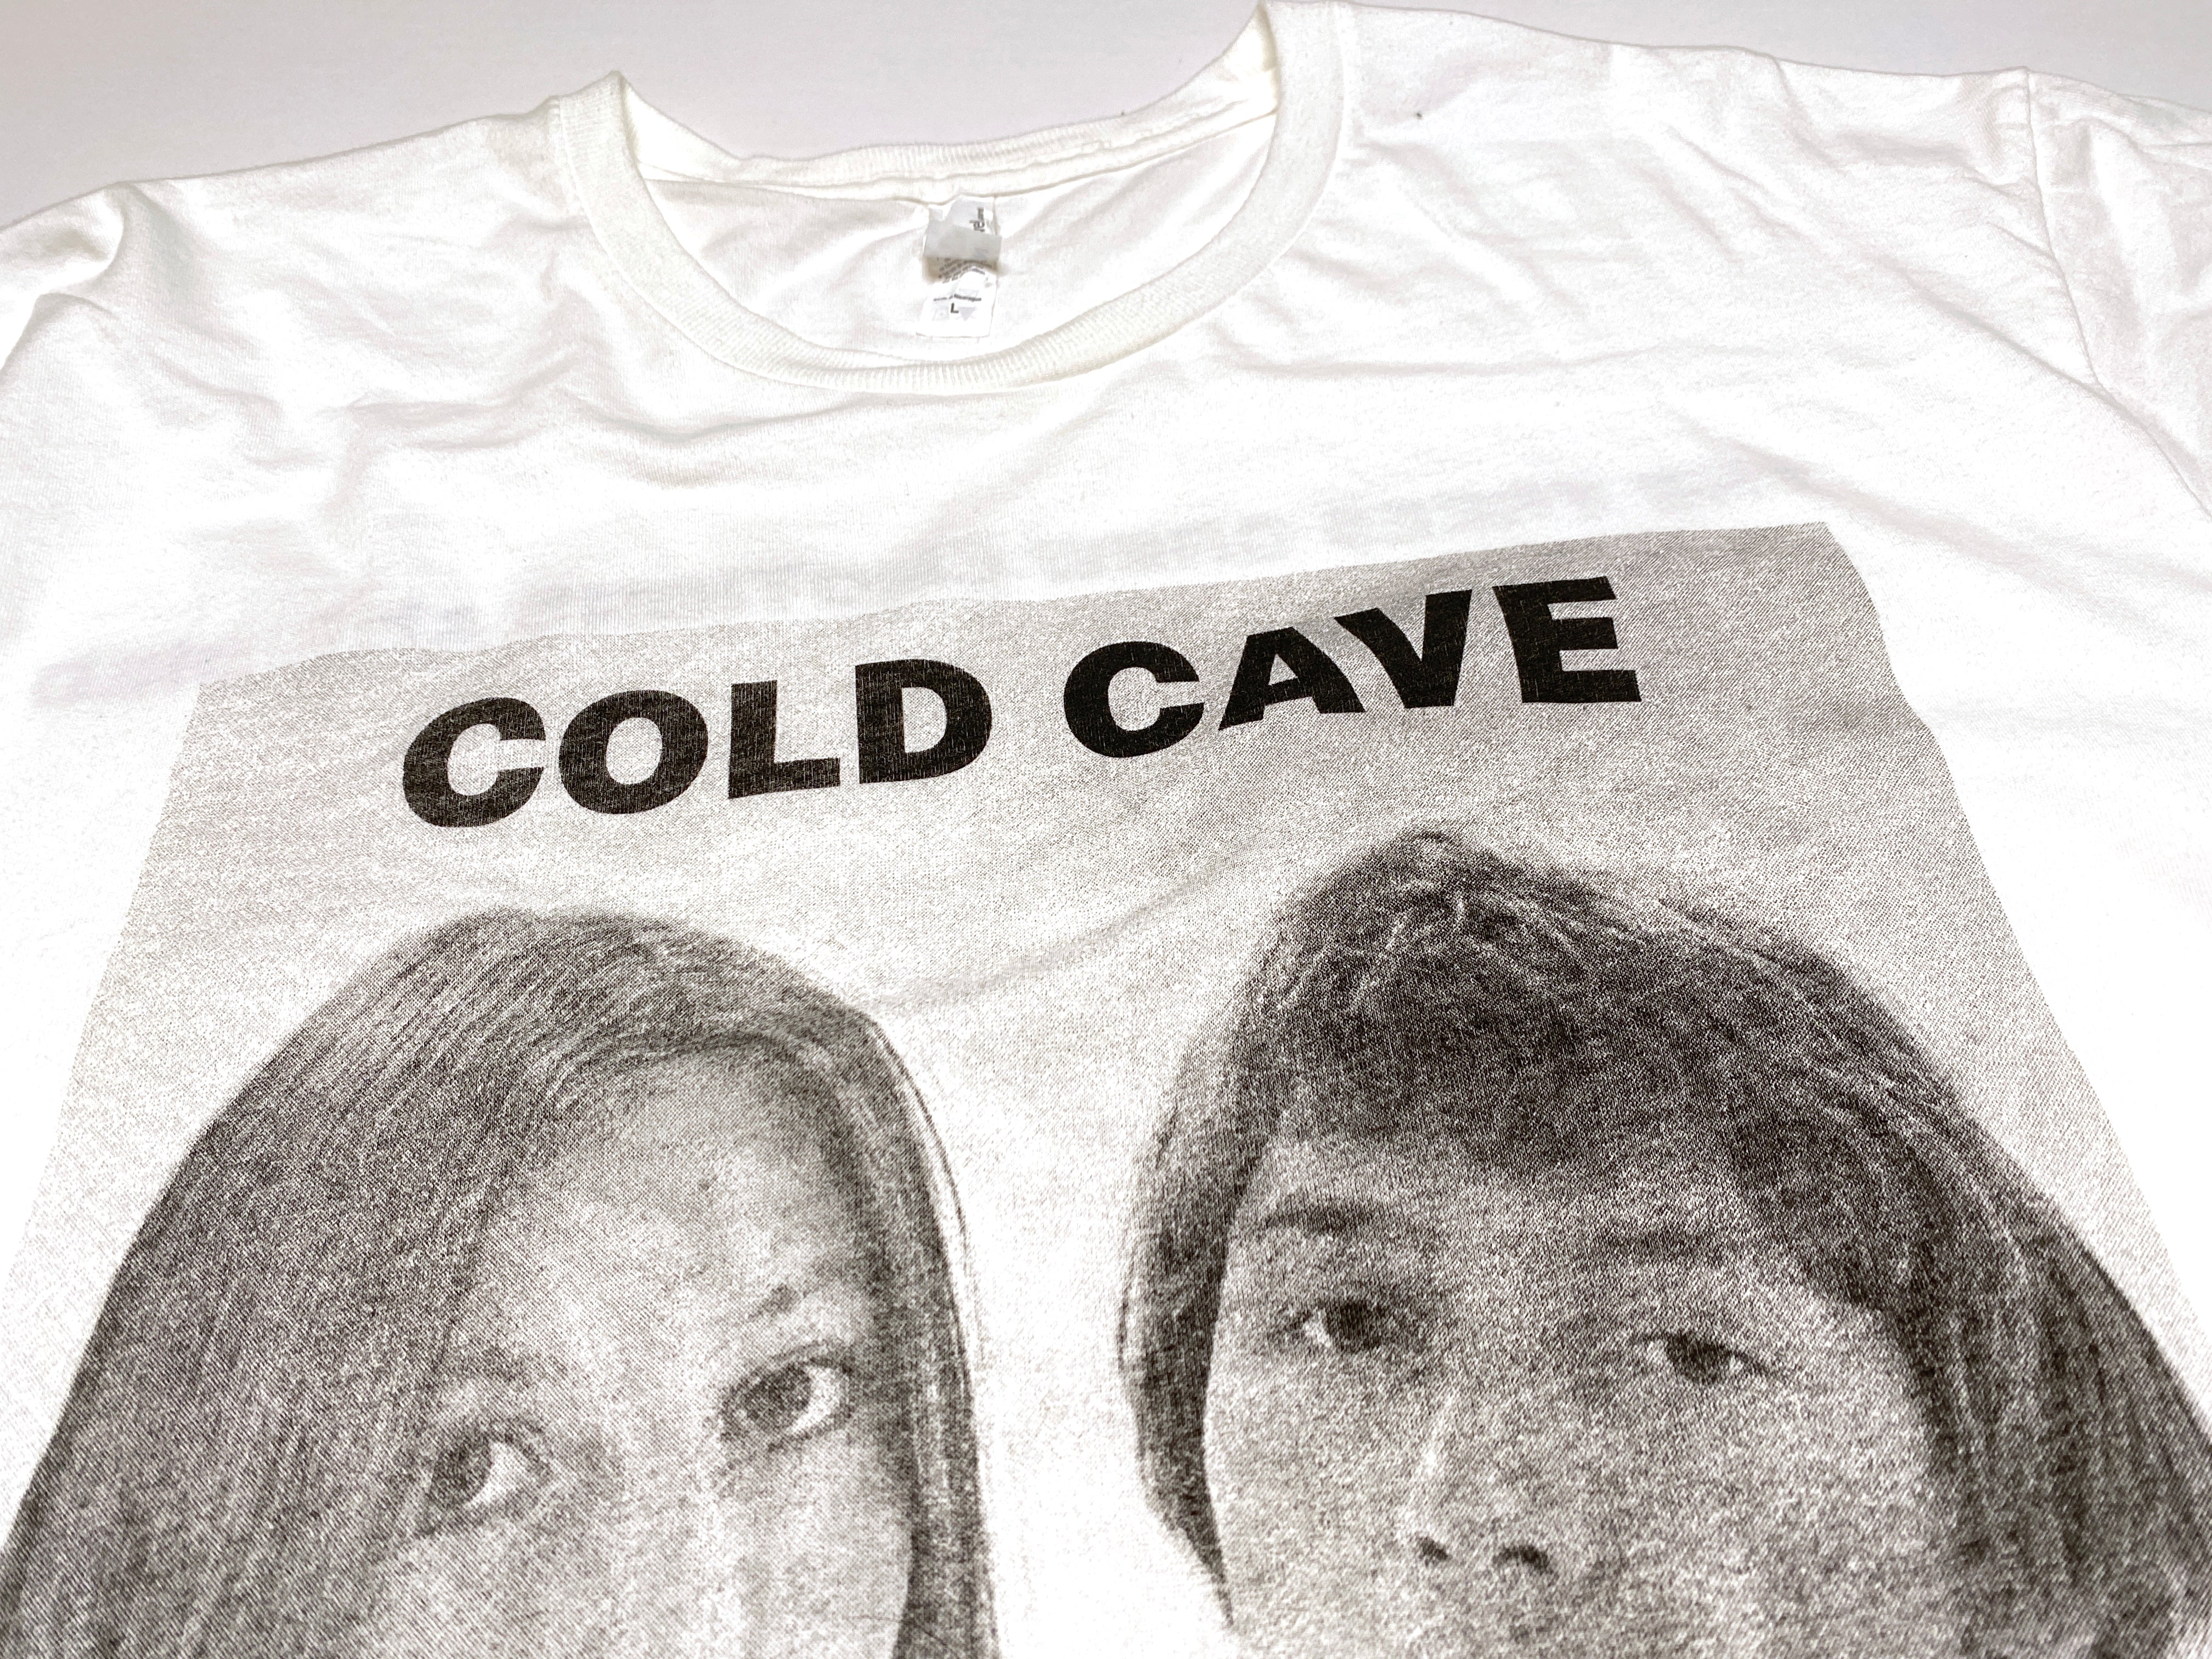 Cold Cave - The Trees Grew Emotions And Died 2008 Tour Shirt Size Large